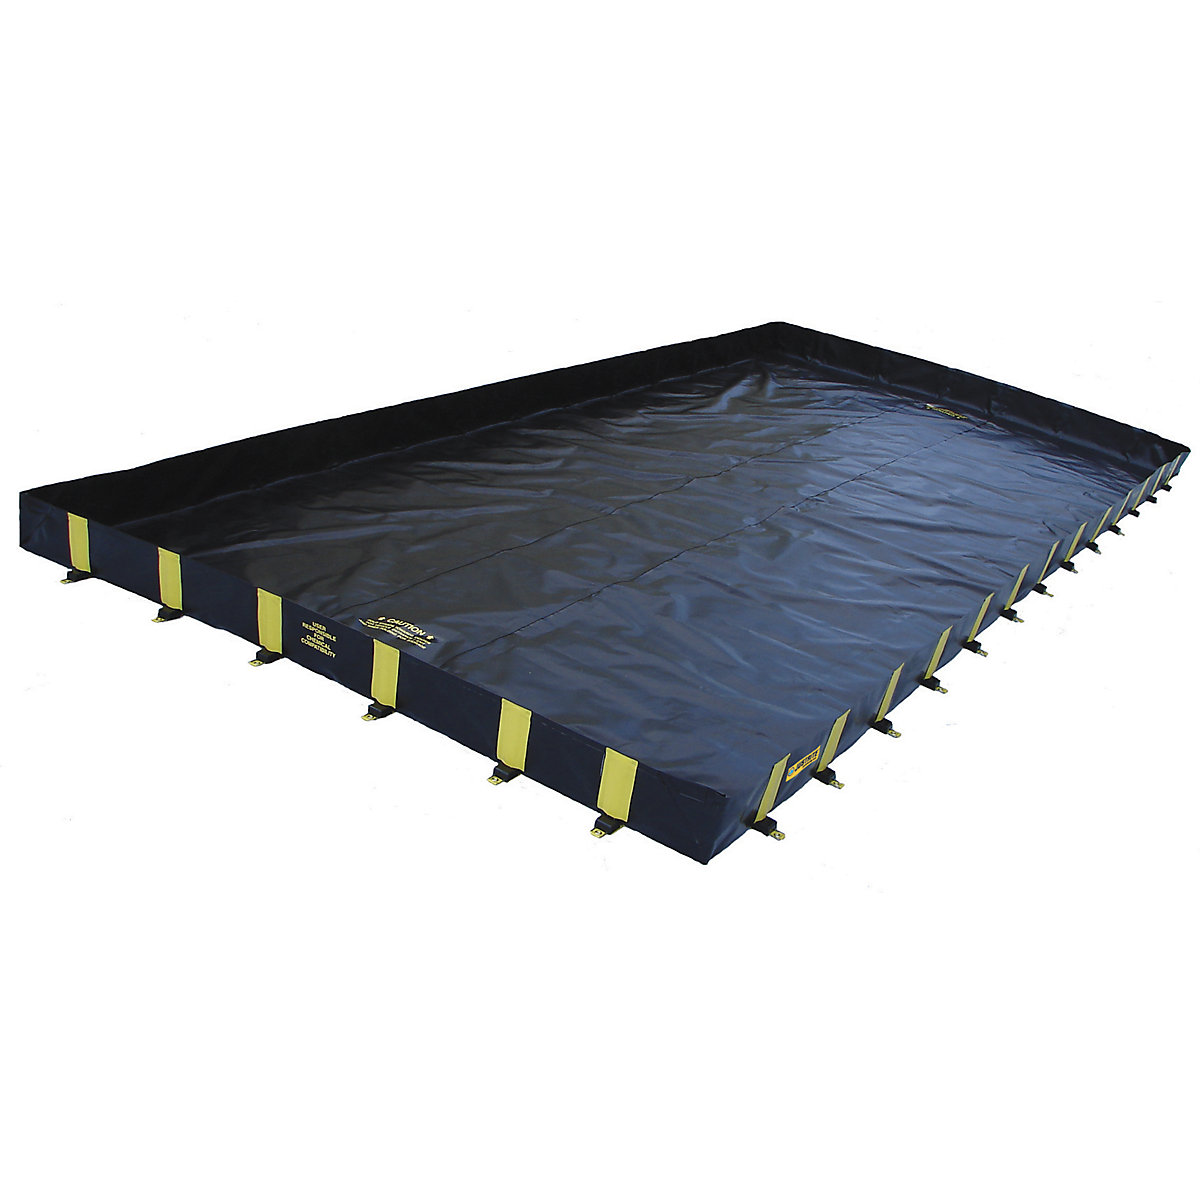 QuickBerm® XT rigid lock folding tray – Justrite, for frequent traffic, LxW 16.5 x 3.7 m-14